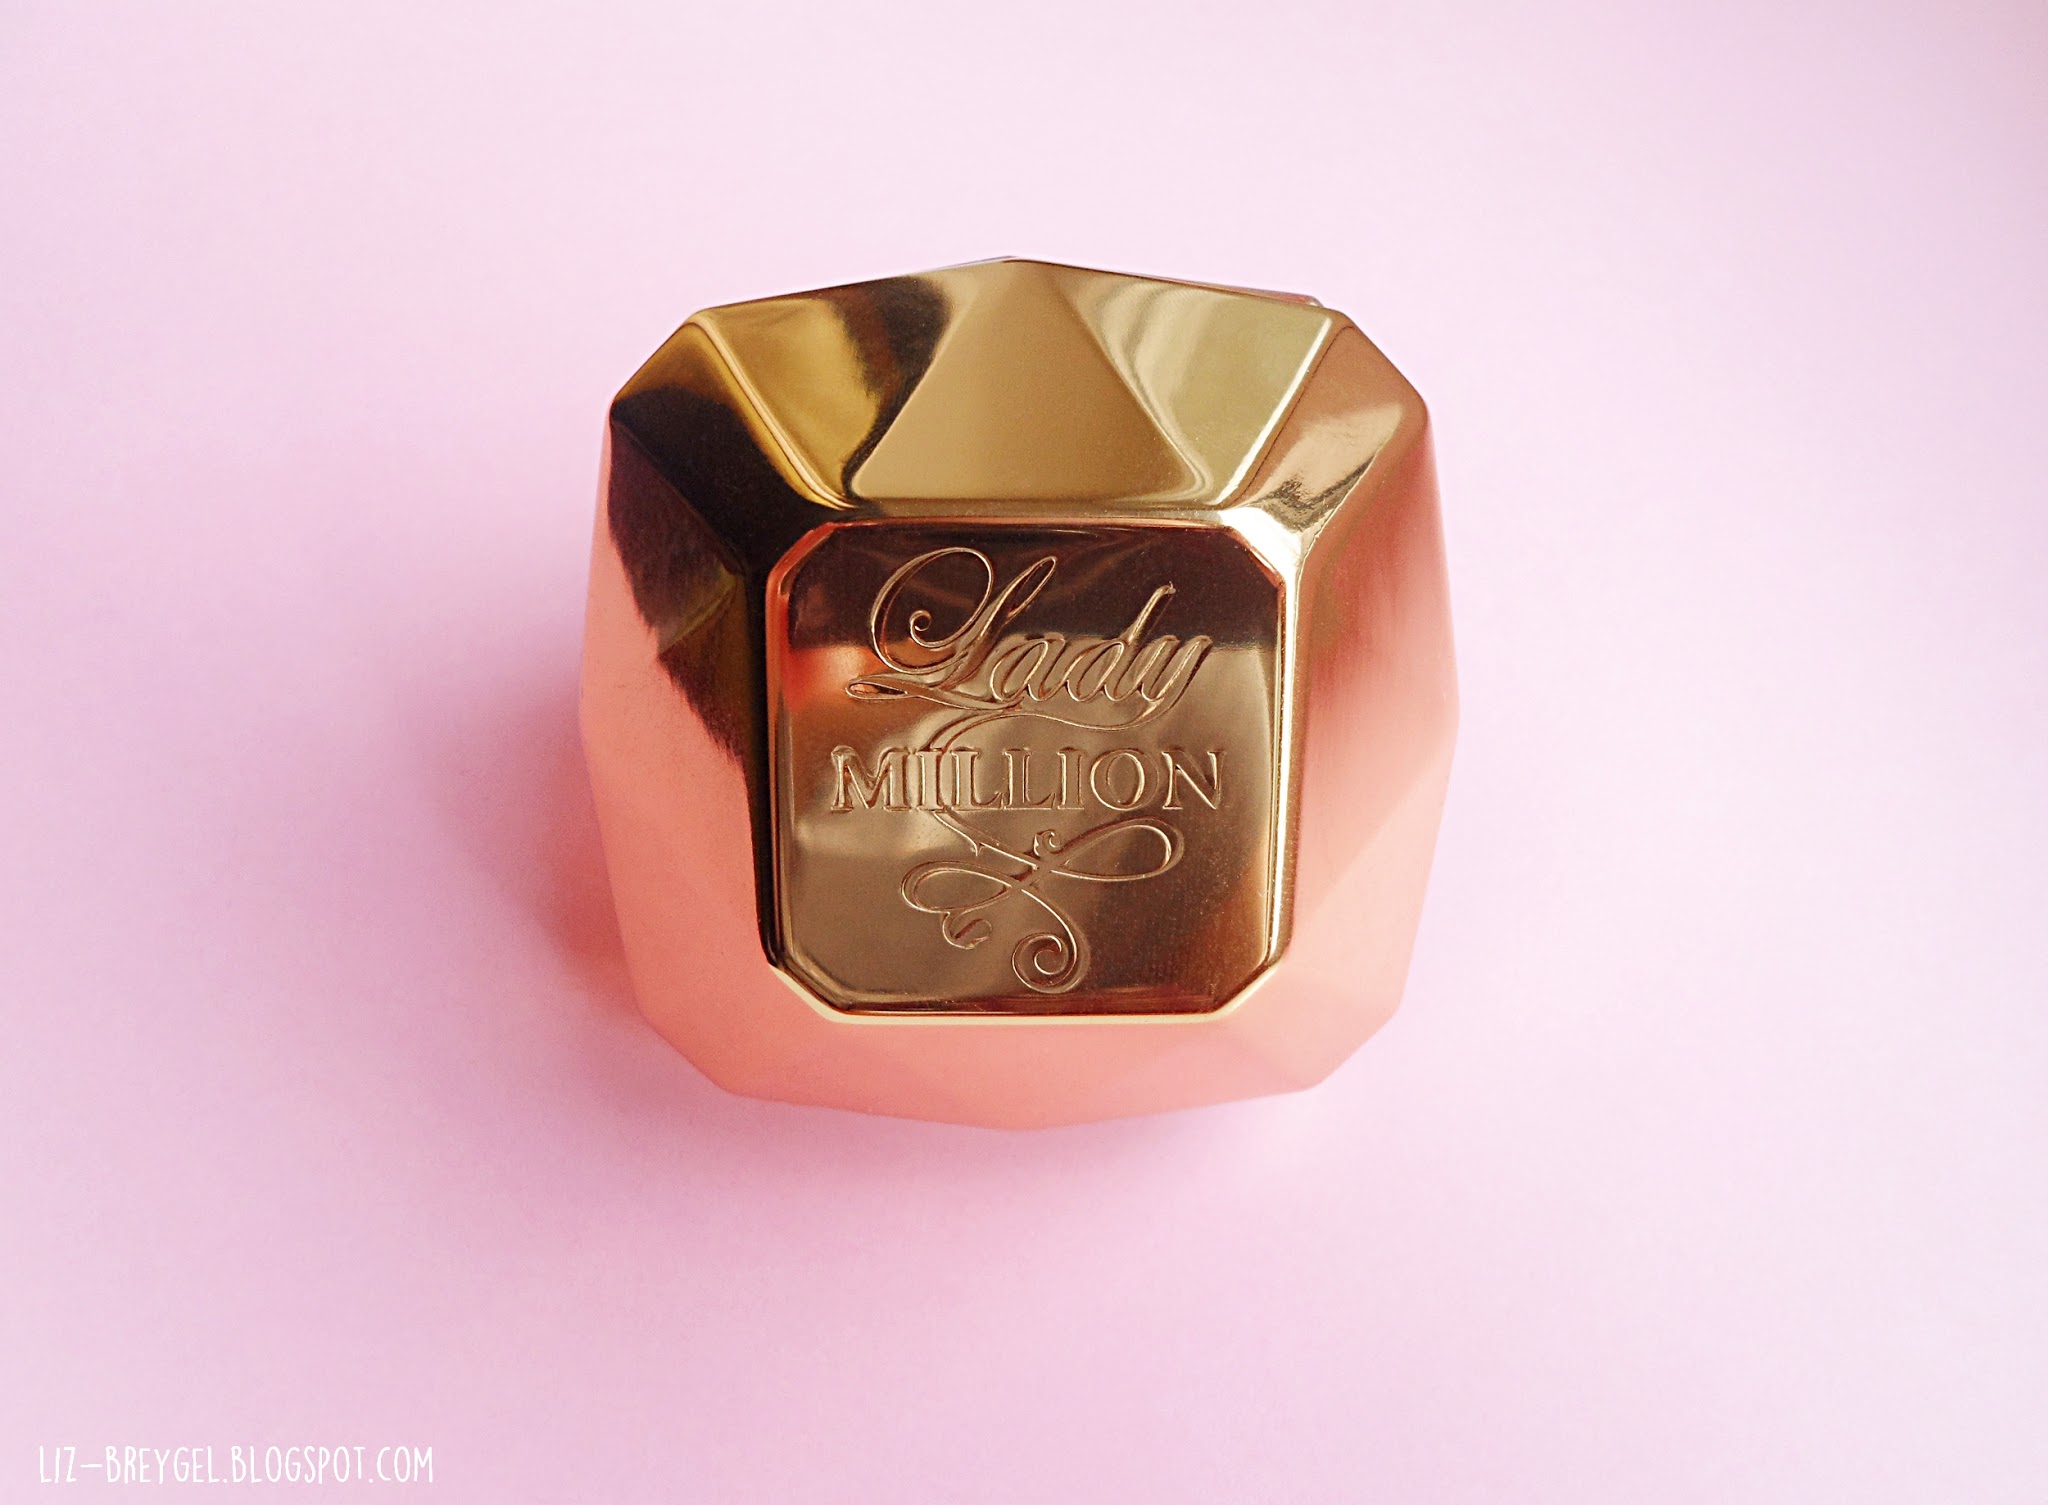 a close-up picture and blogger's review on paco rabanne lady million perfume